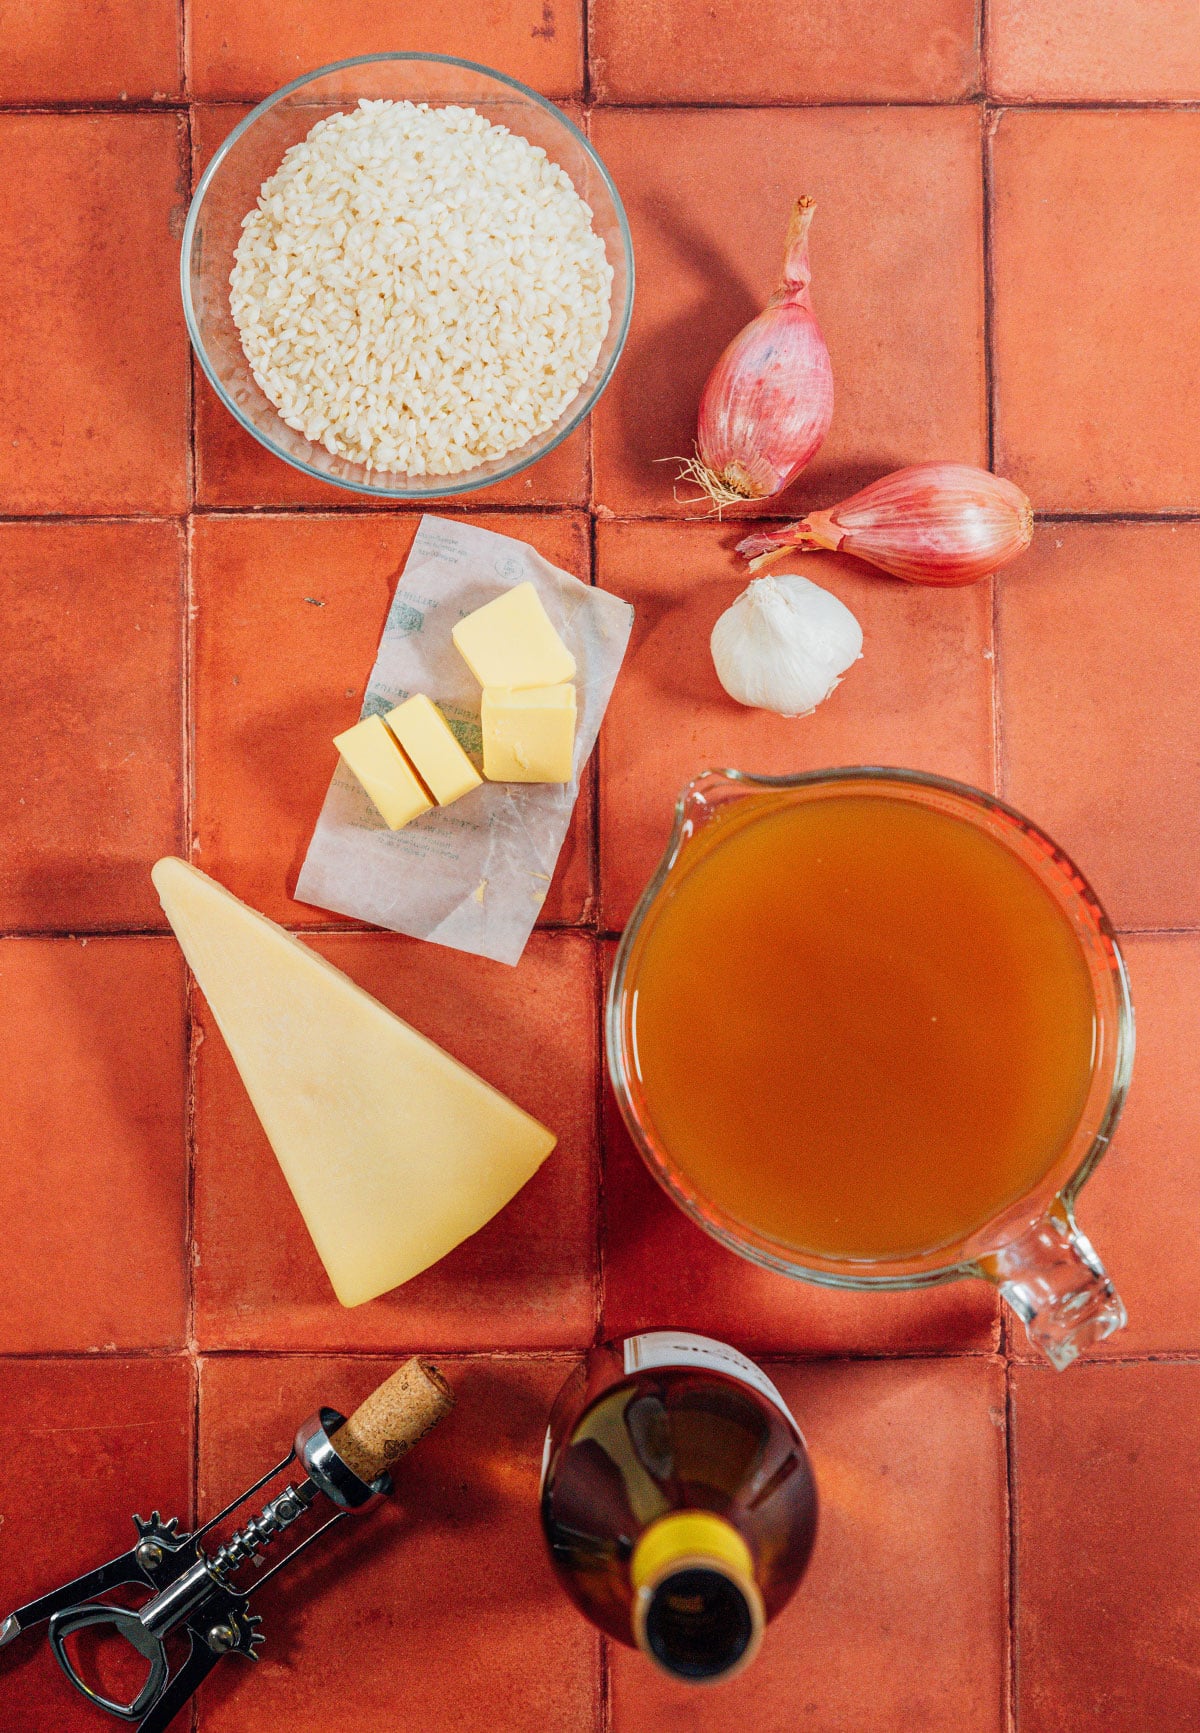 Ingredients for risotto on red clay tile.